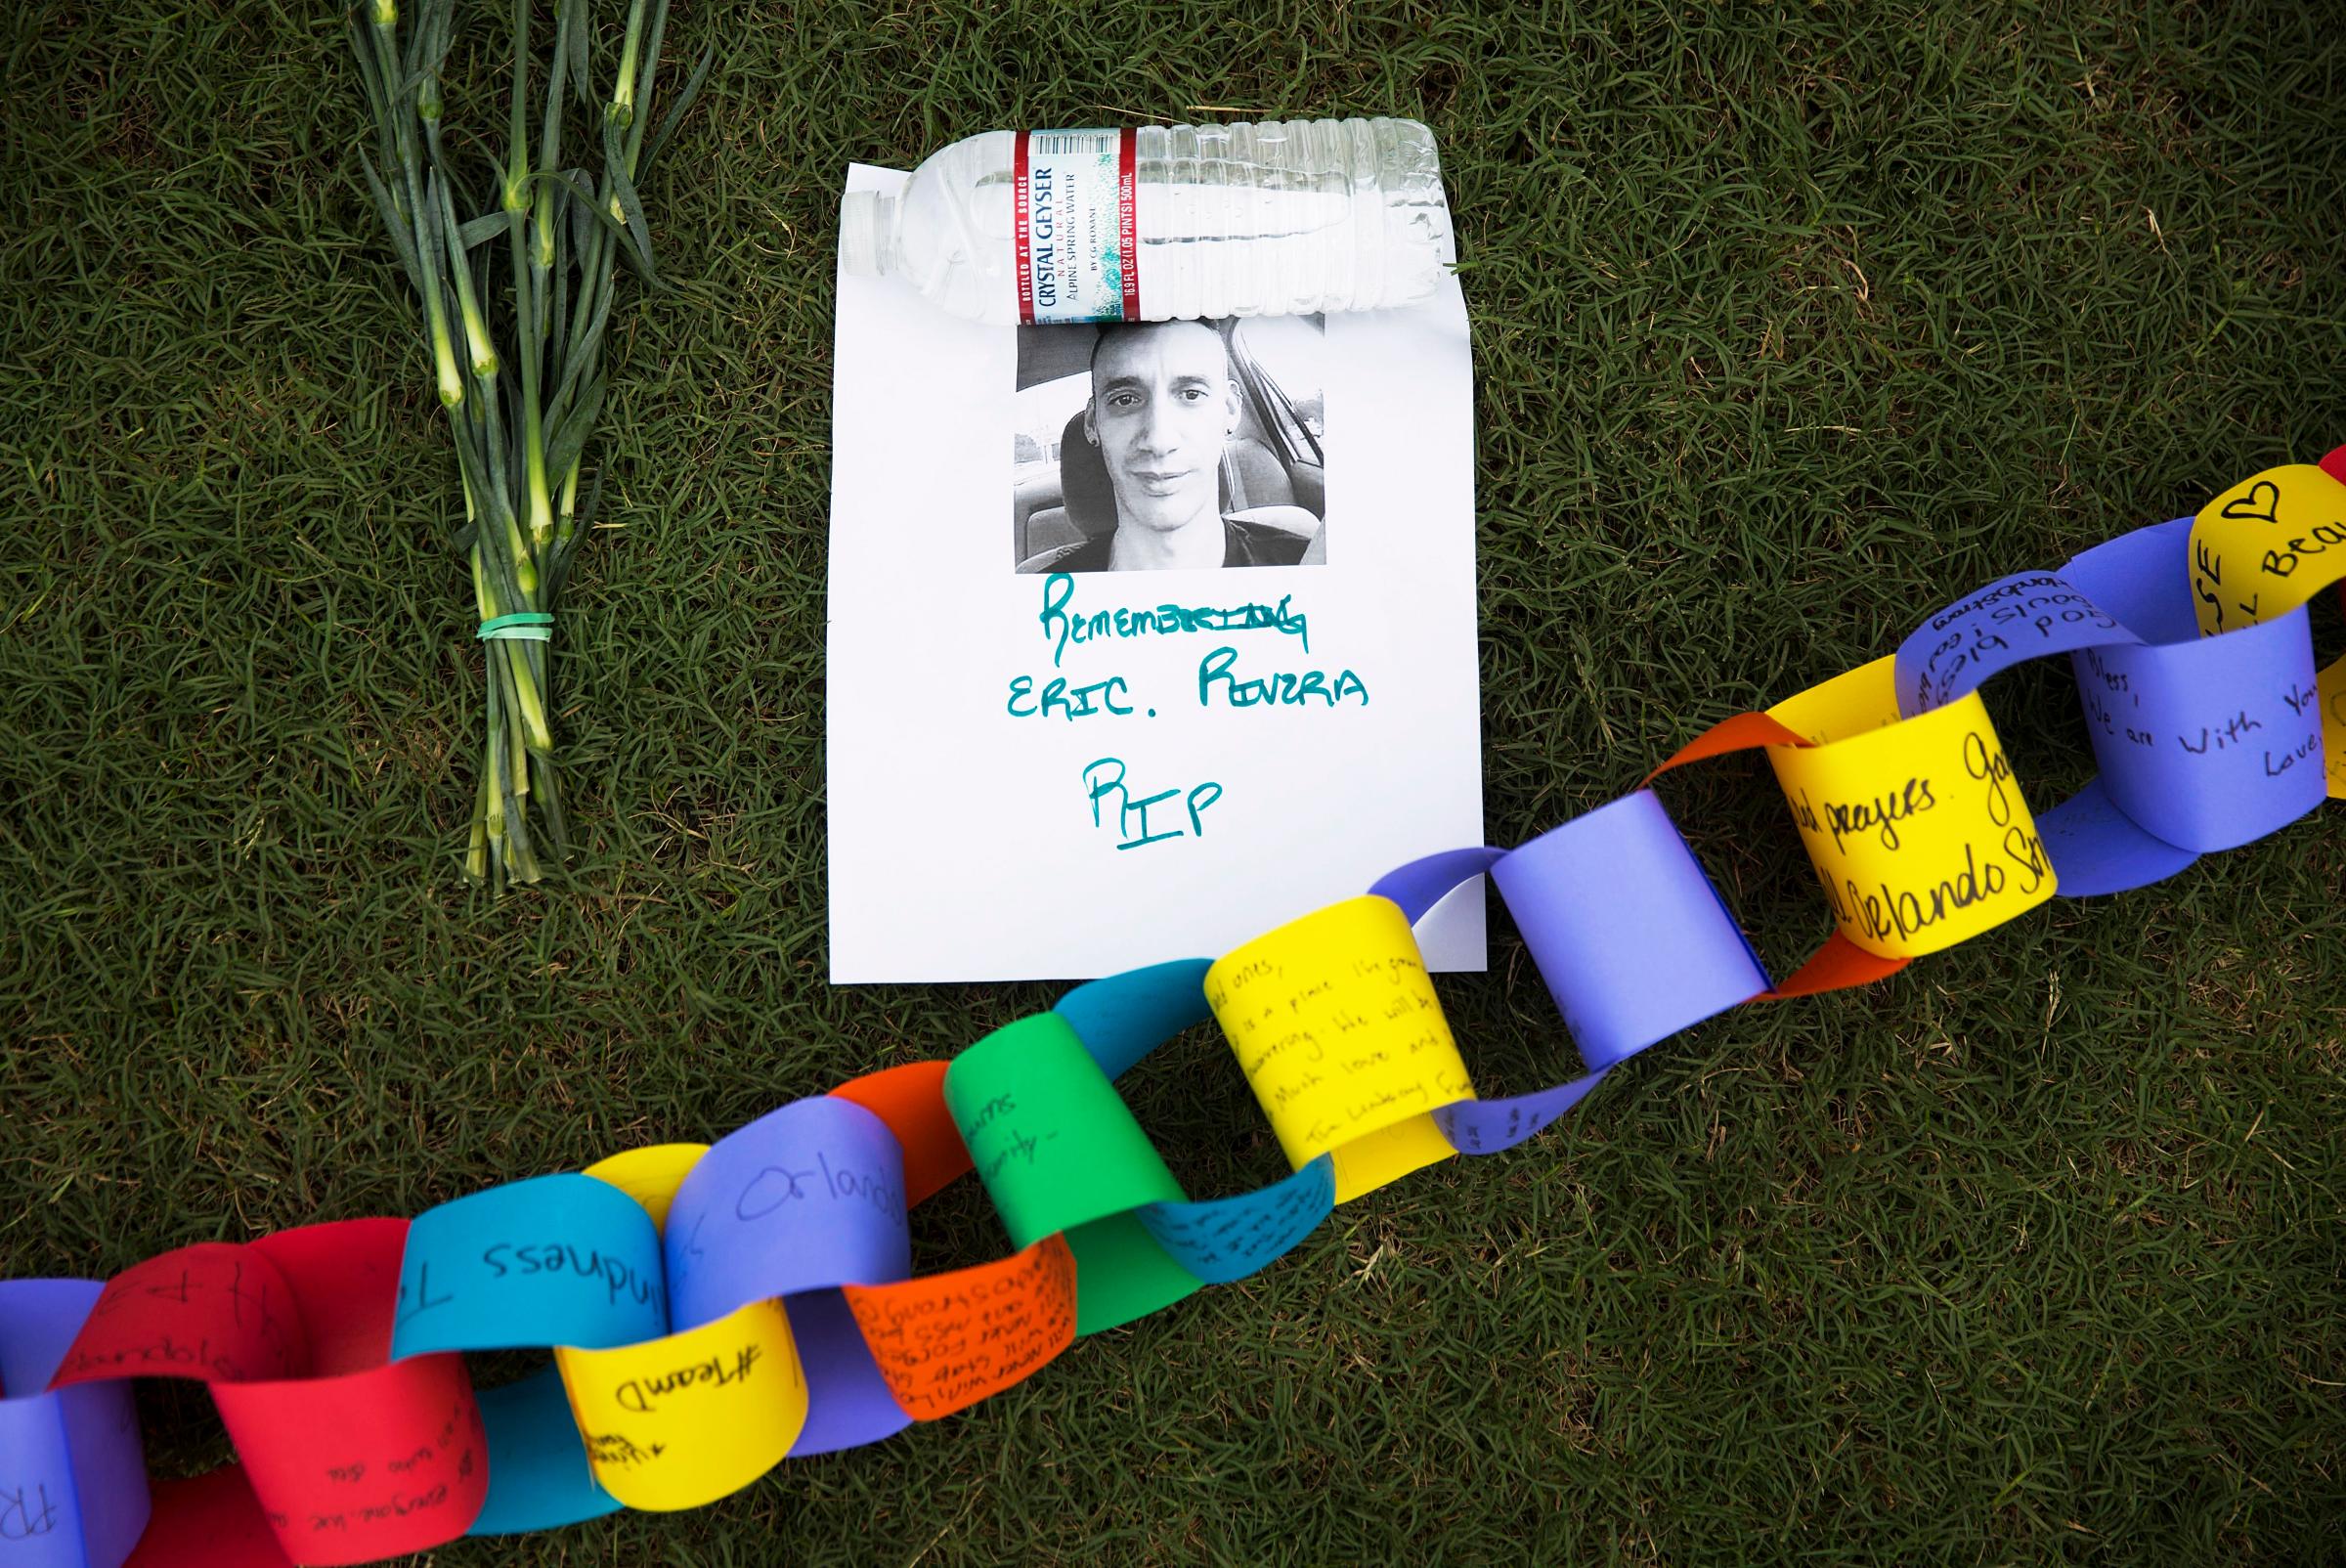 A remembrance for Eric Rivera, killed in the mass shooting at the Pulse nightclub, sits amongst a makeshift memorial for the victims in Orlando, Fla., on June 13, 2016.